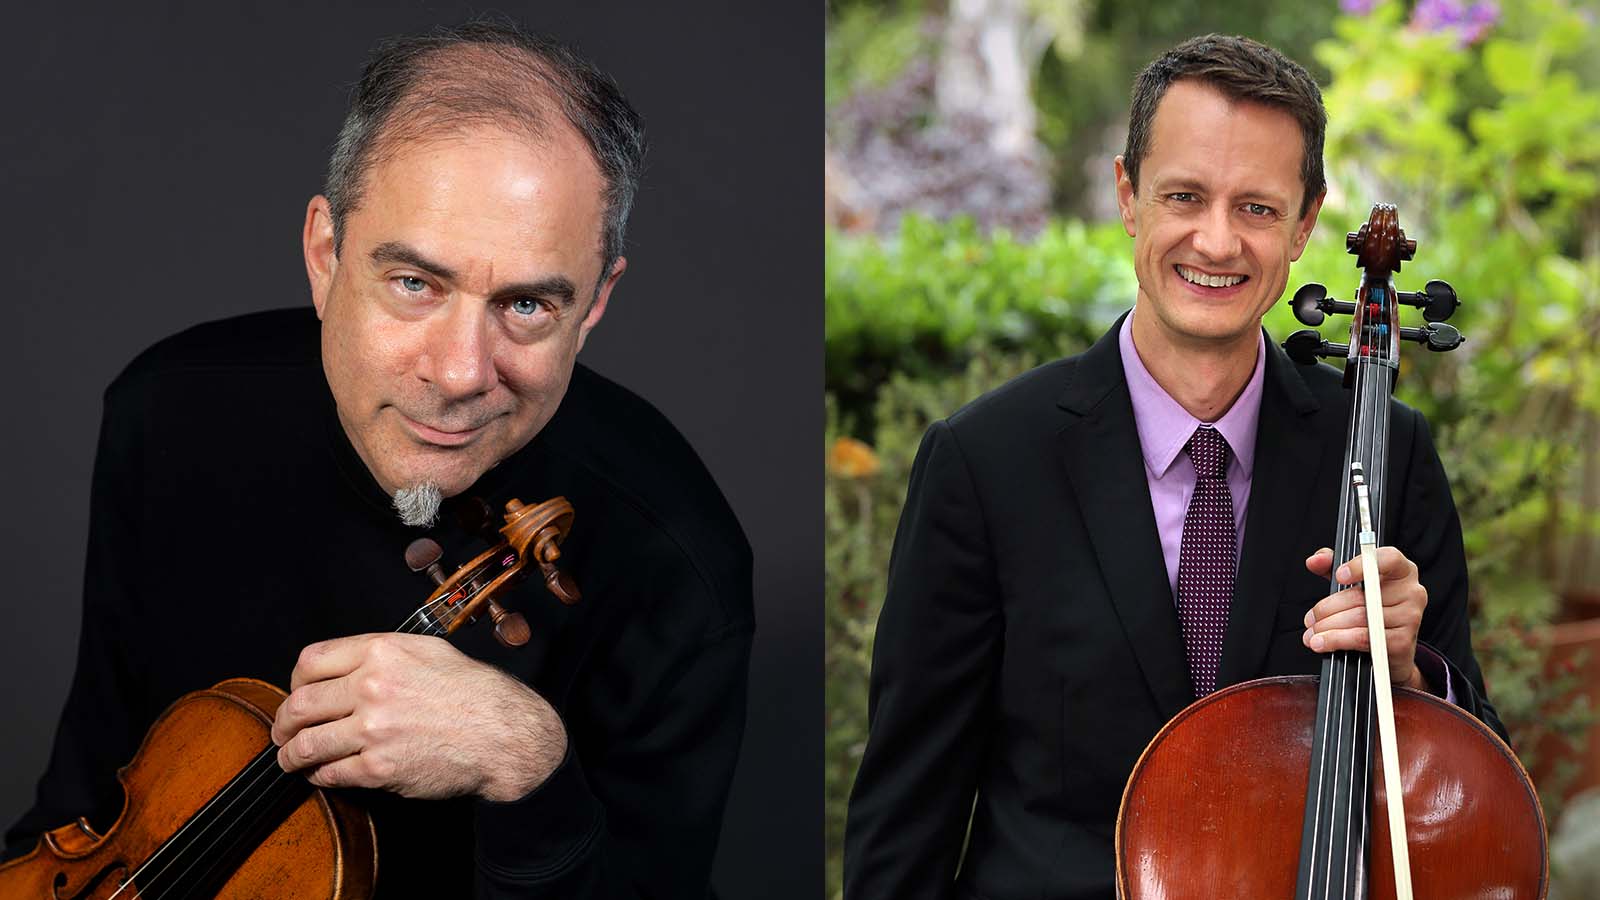 A combined photo of James Stern with his violin and Eric Kutz with his cello.